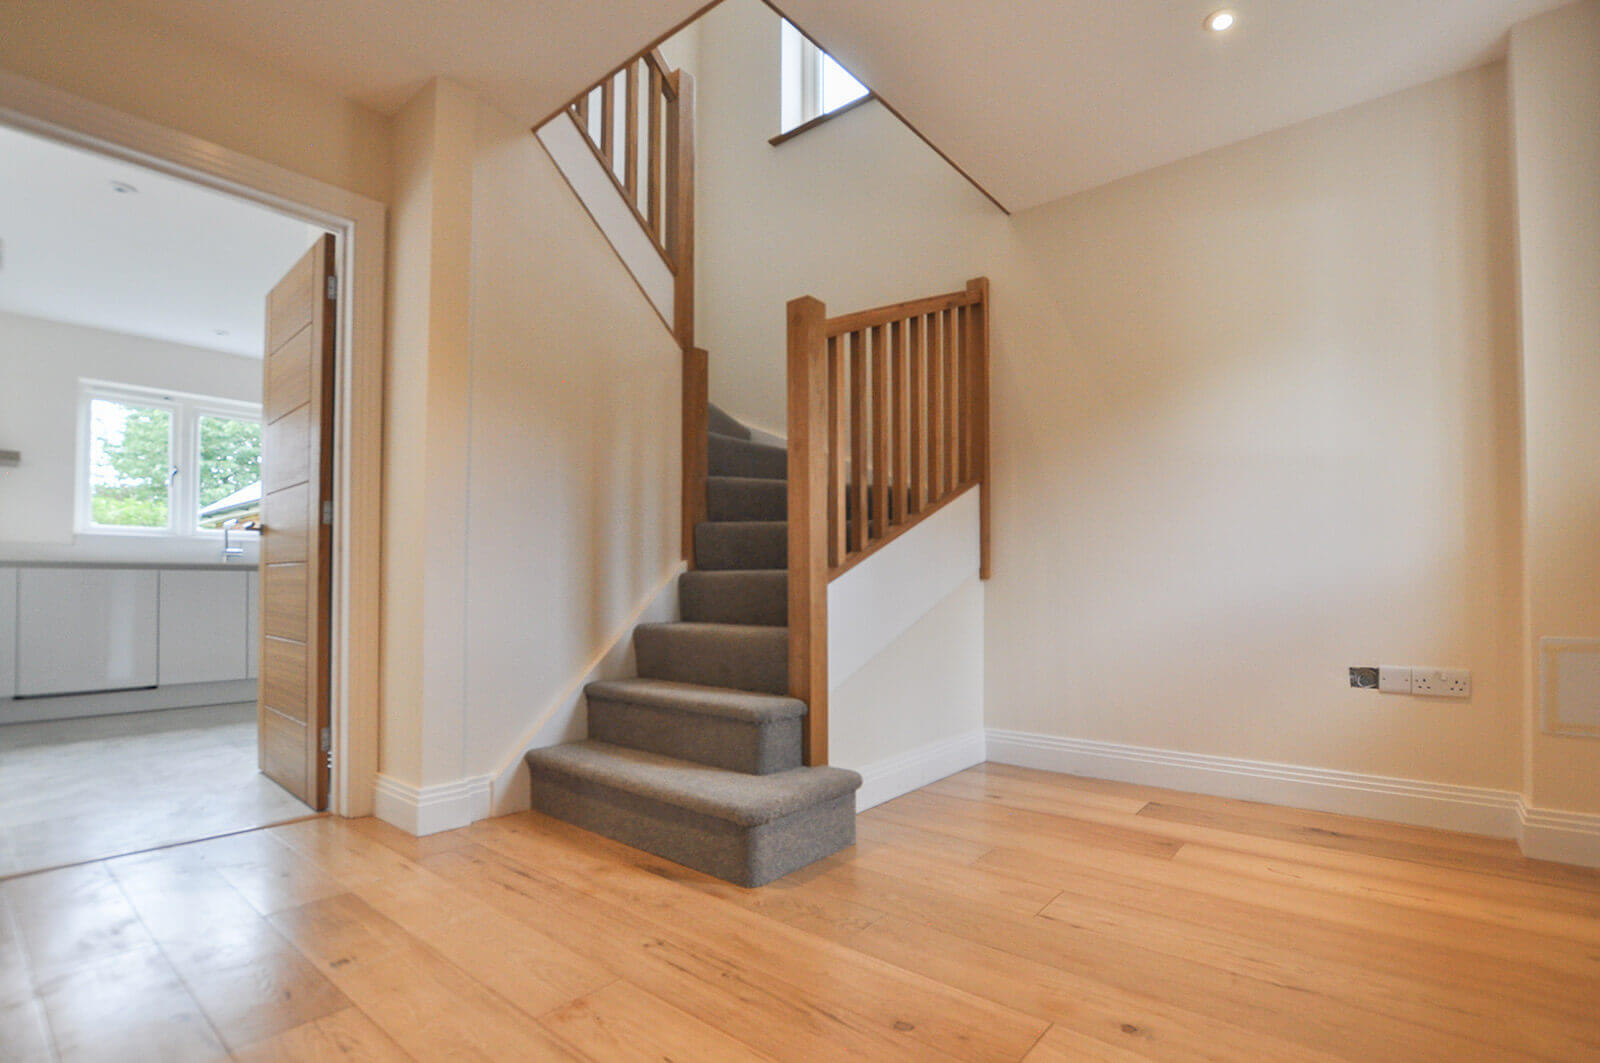 Downstairs hallway with hard wood floor and staircase.